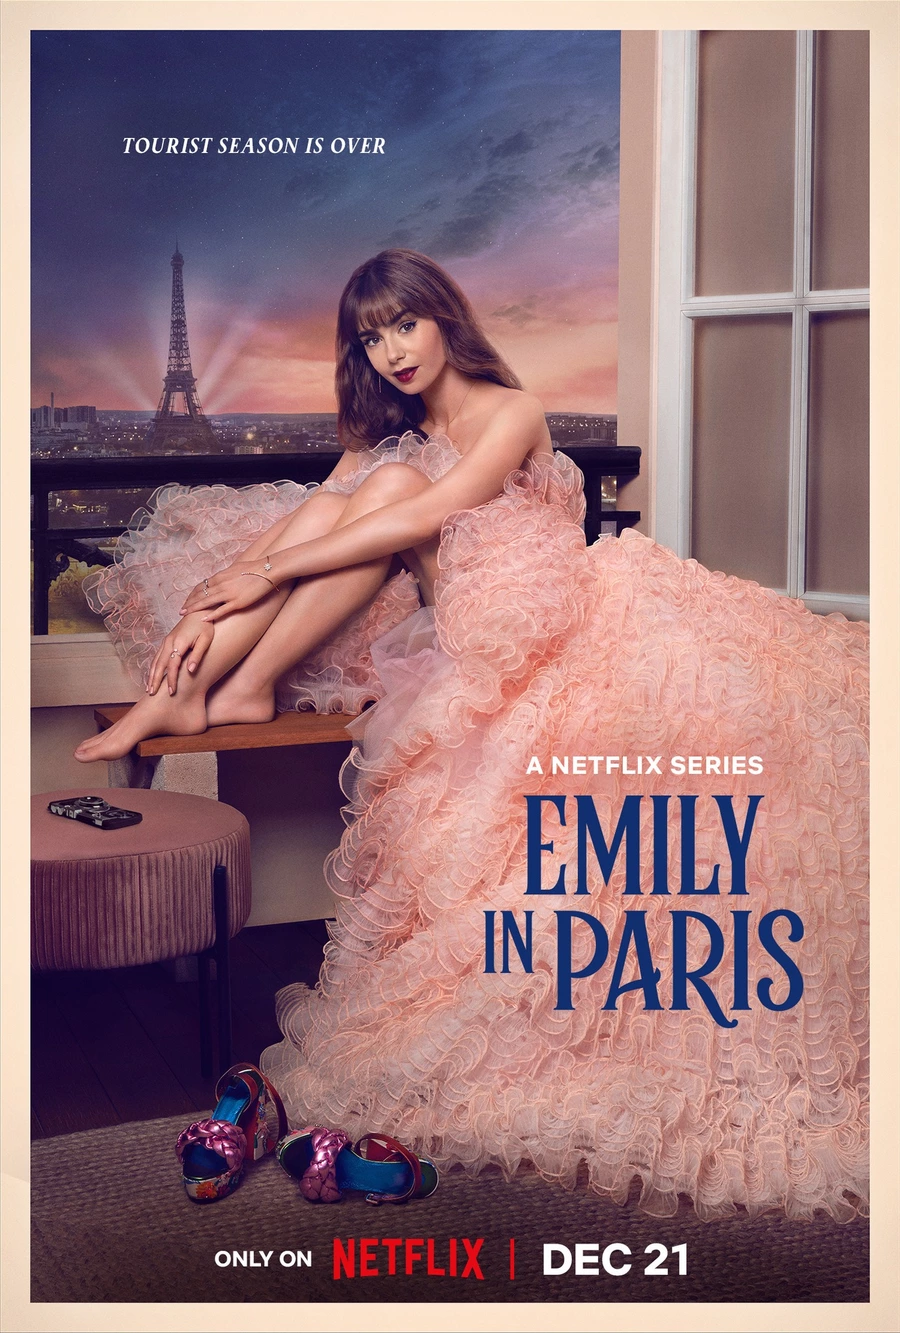 5688 today the third season of the romantic comedy emily in paris was released on netflix in whi